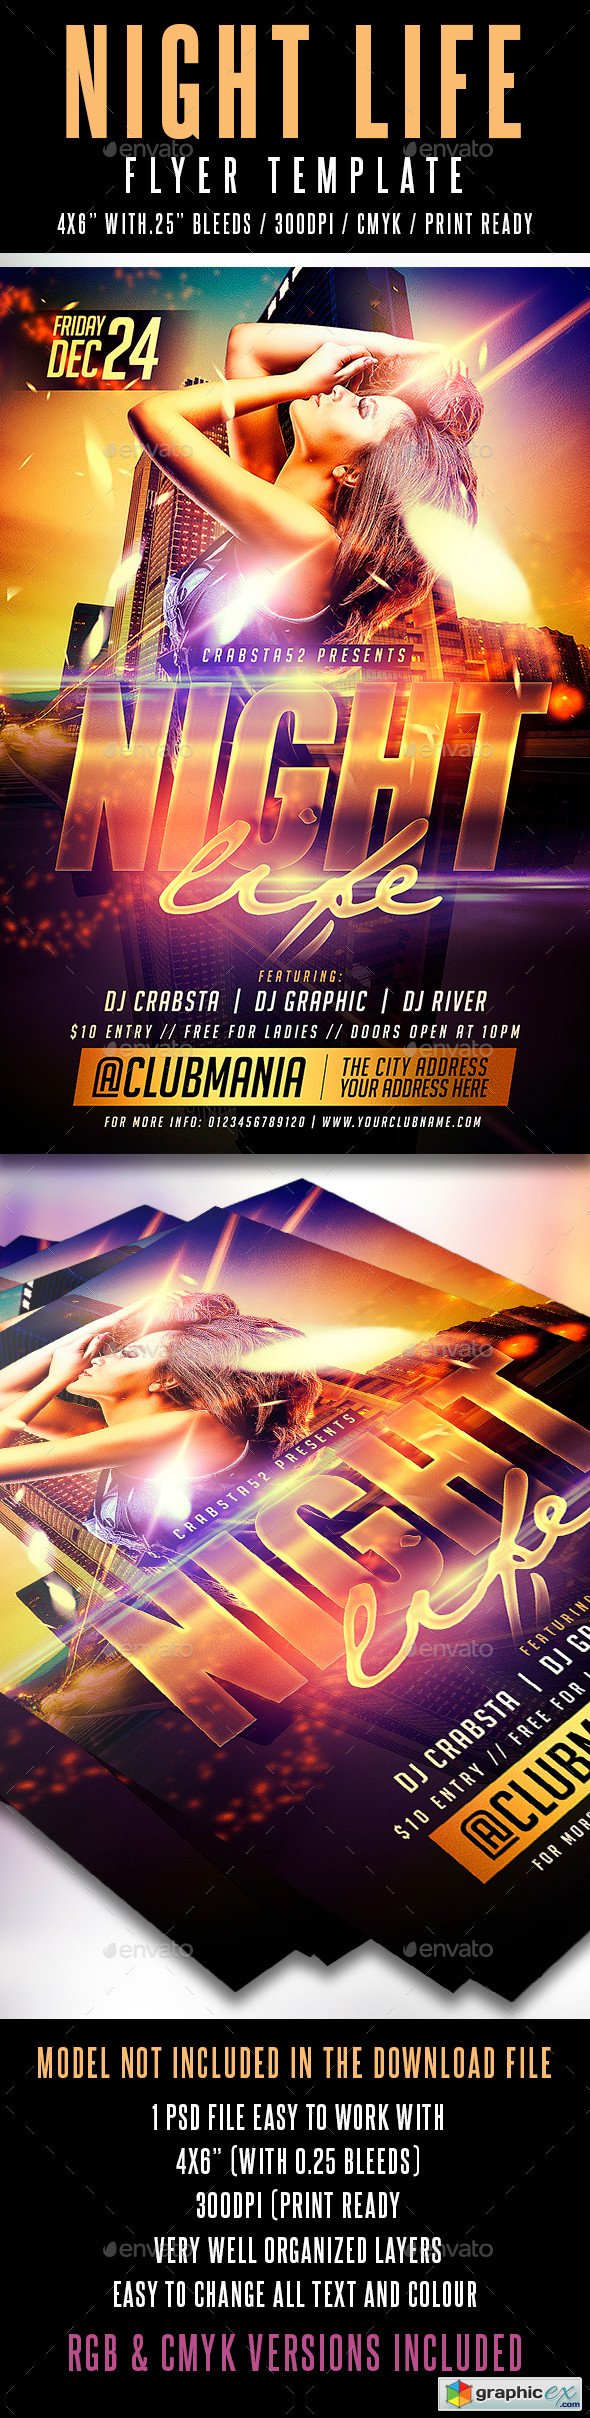 Night Life Flyer Template